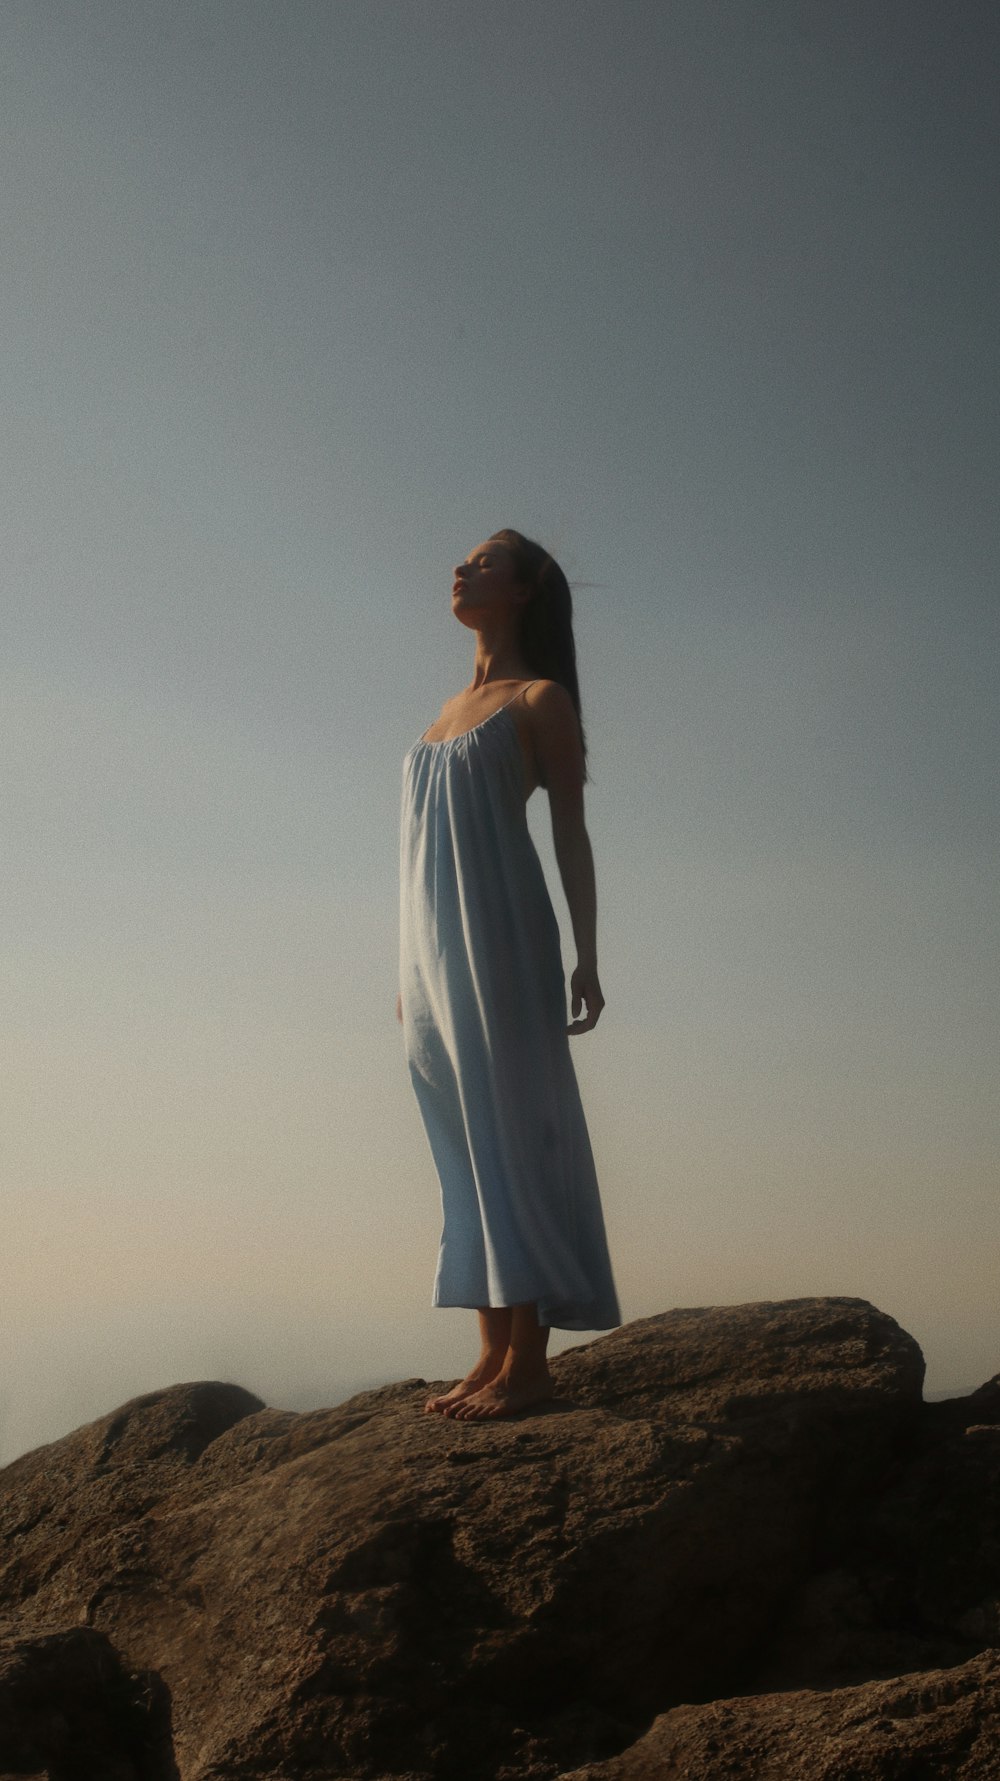 woman in white dress standing on brown rock during daytime